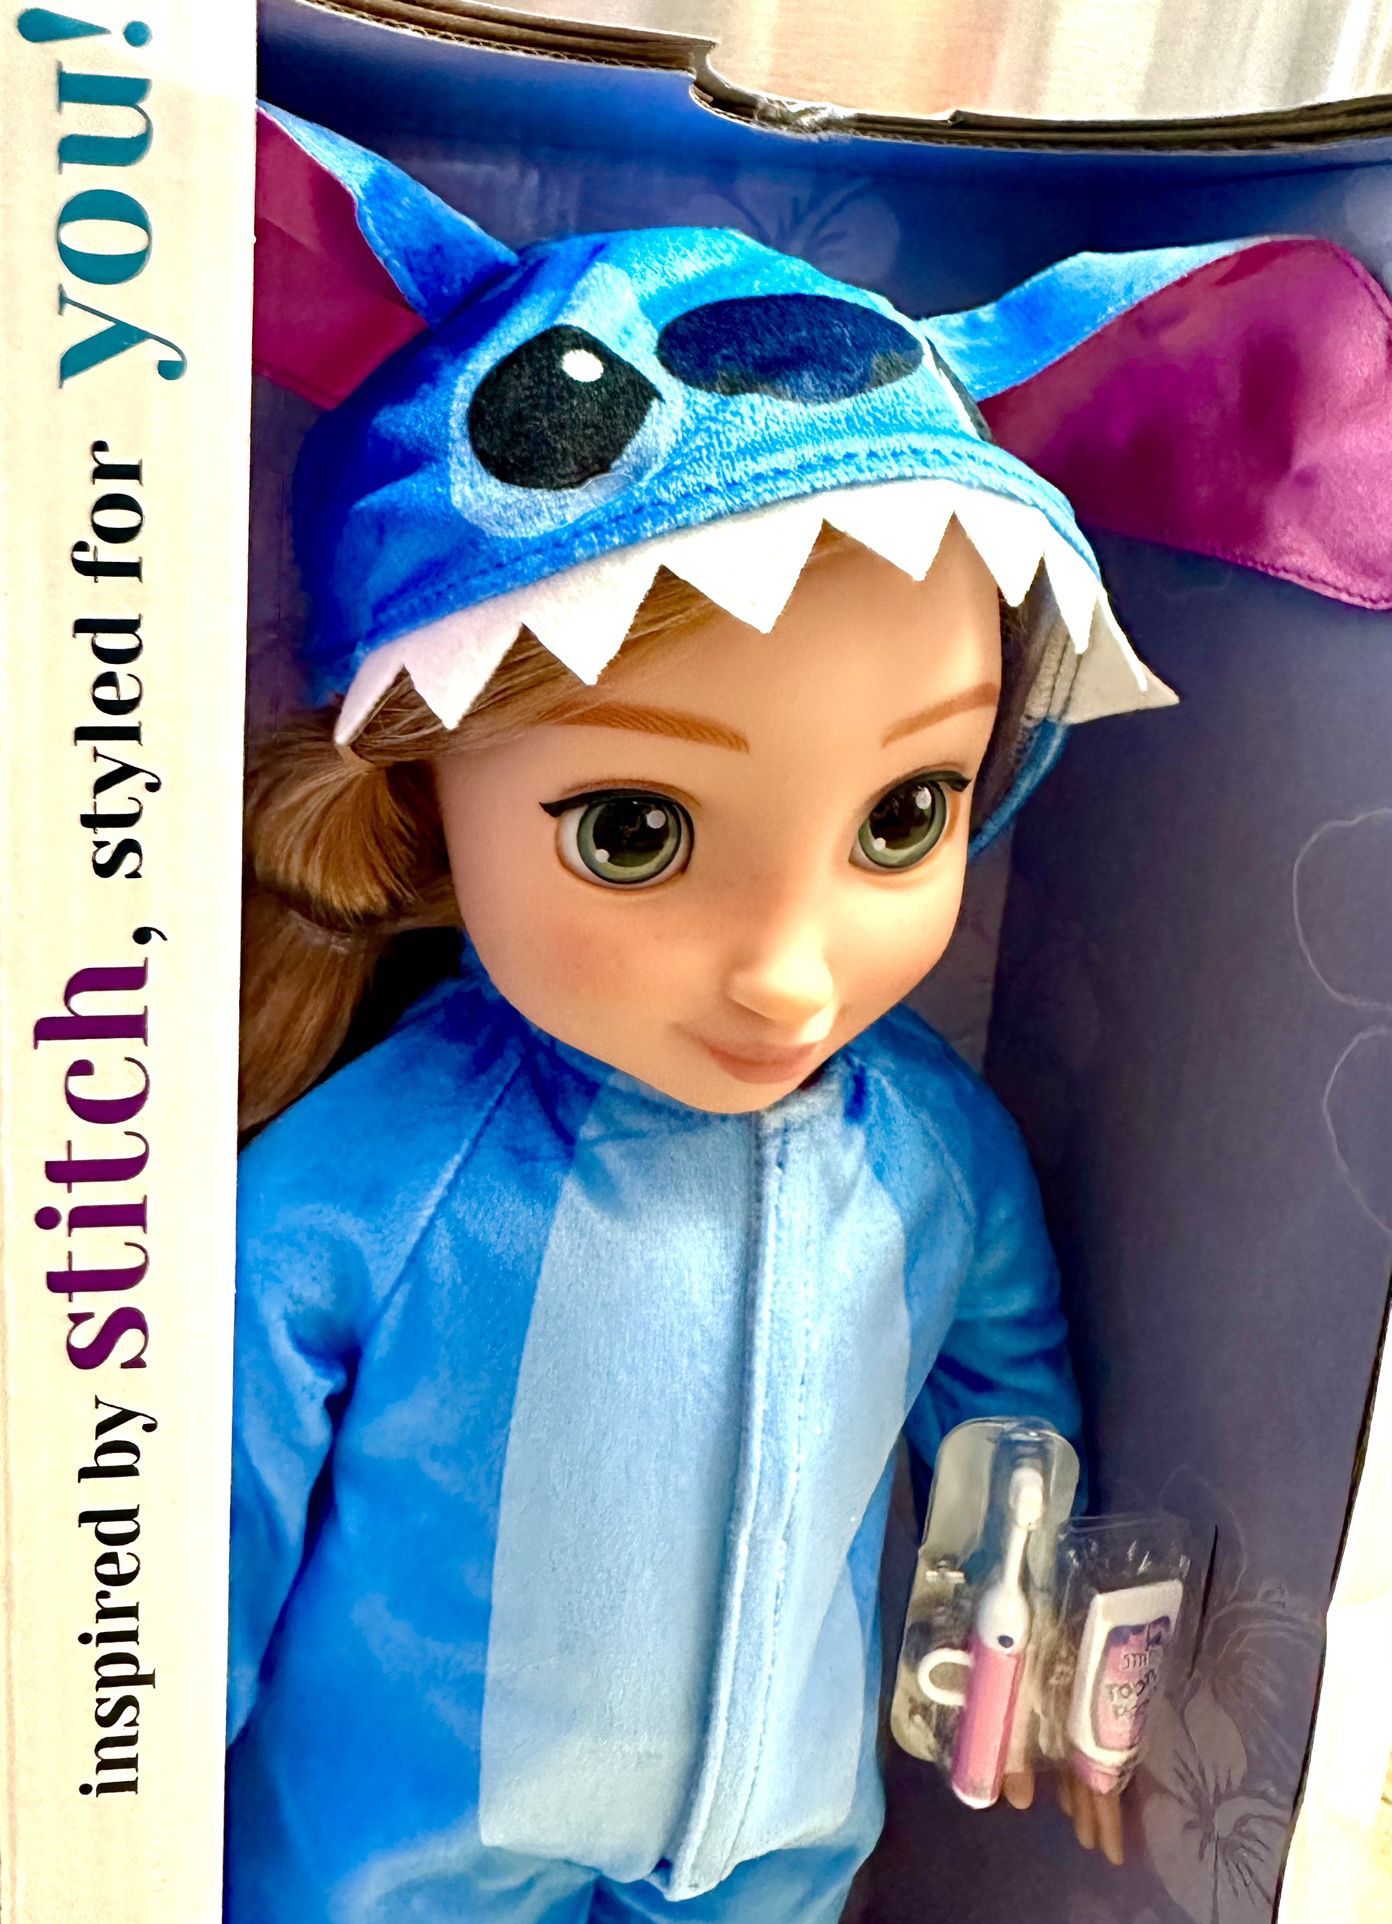 Disney's ILY 4ever Inspired By Stitch Doll - Strawberry Blonde Hair - New  In Box! for Sale in Smithtown, NY - OfferUp